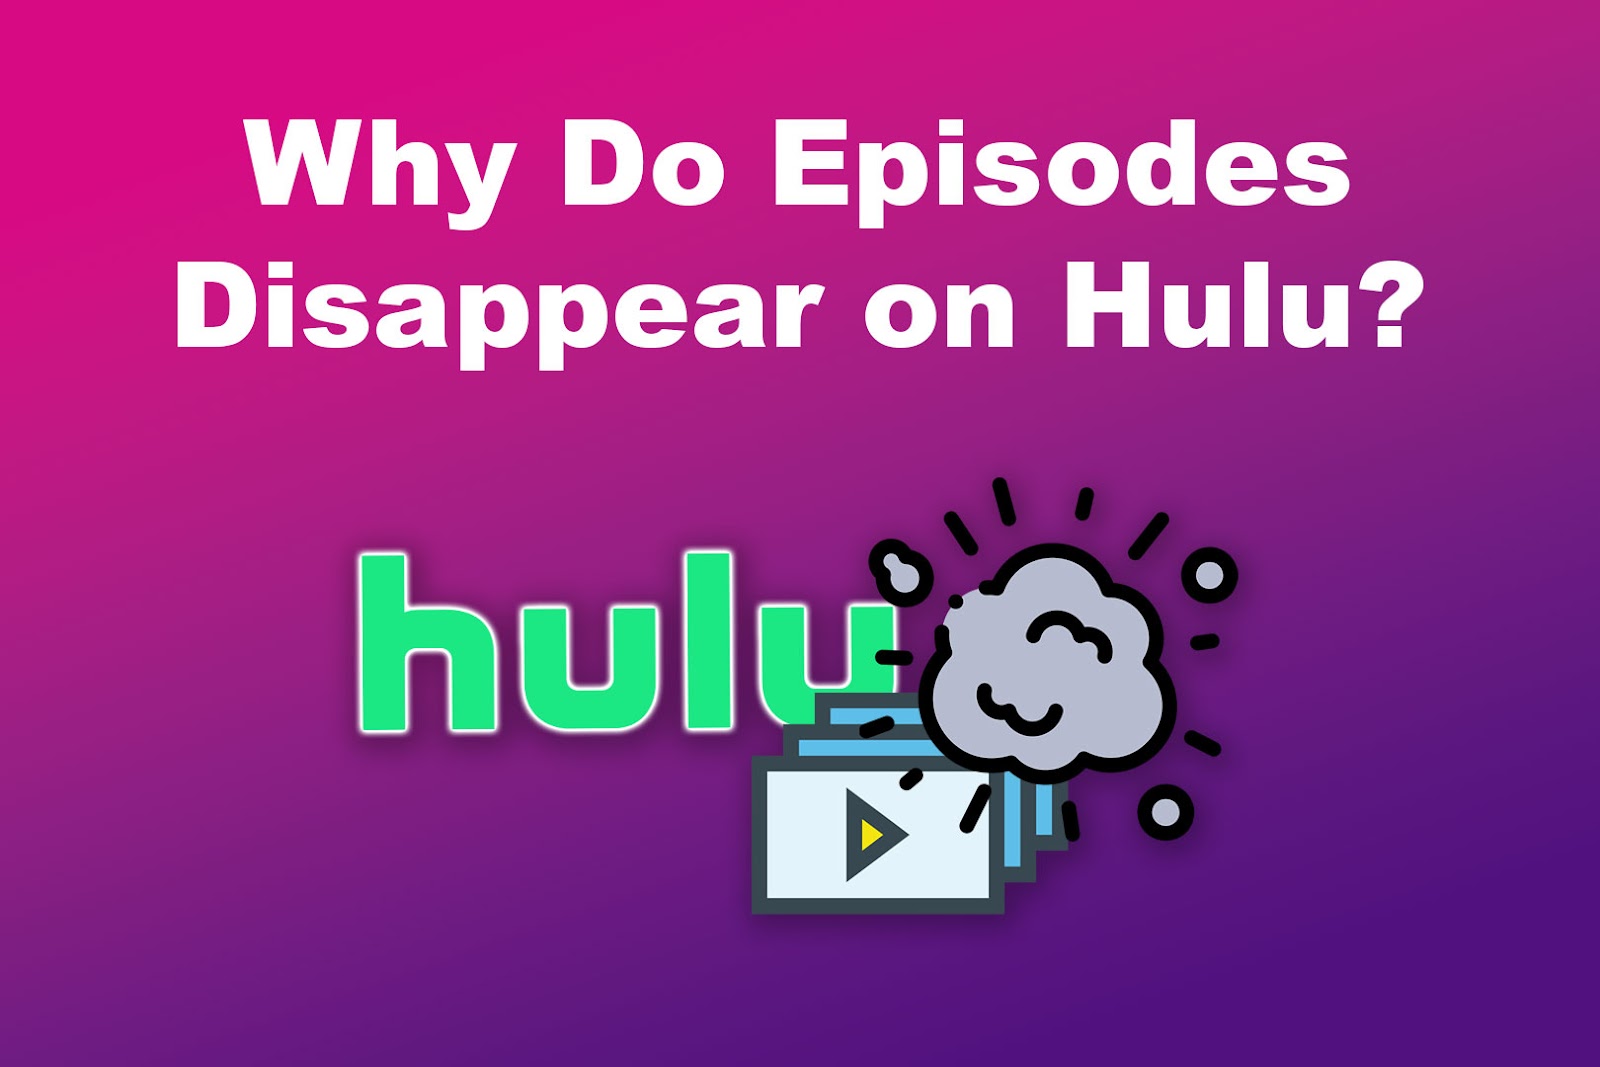 Why Do Episodes Disappear on Hulu?